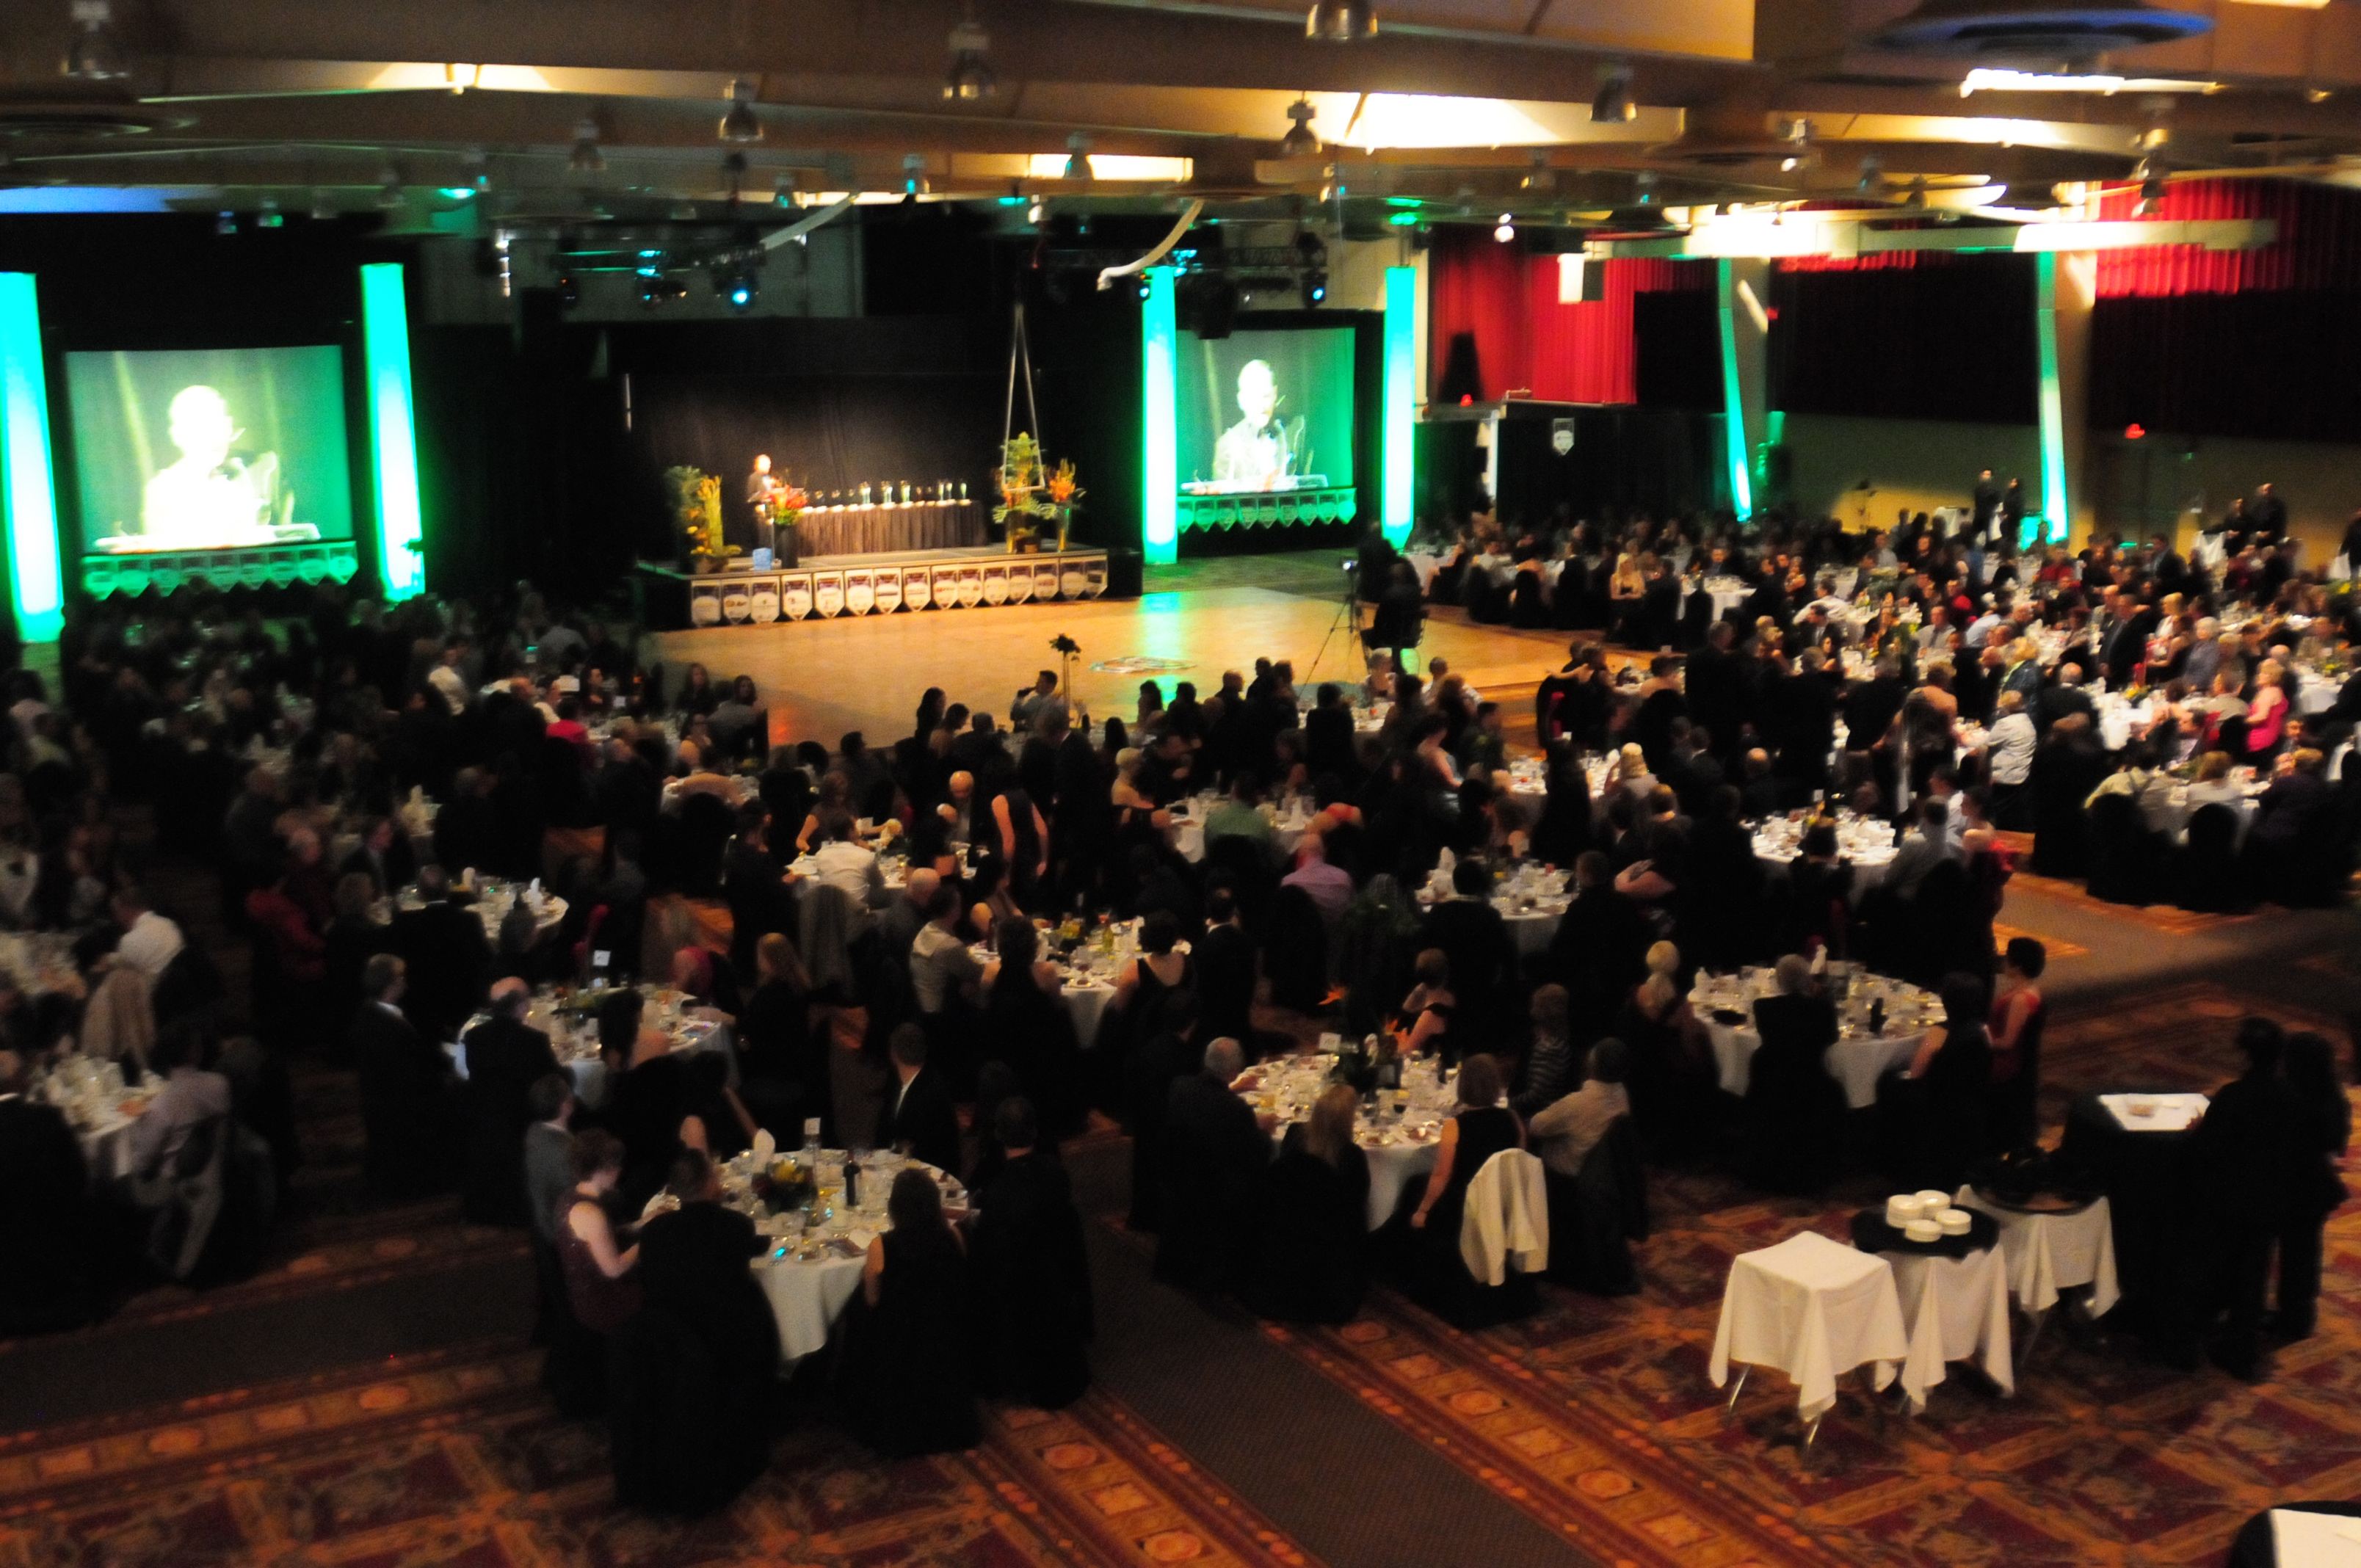 CELEBRATION- Hundreds gathered to recognize award winners during the Awards of Excellence in Housing & President’s Gala